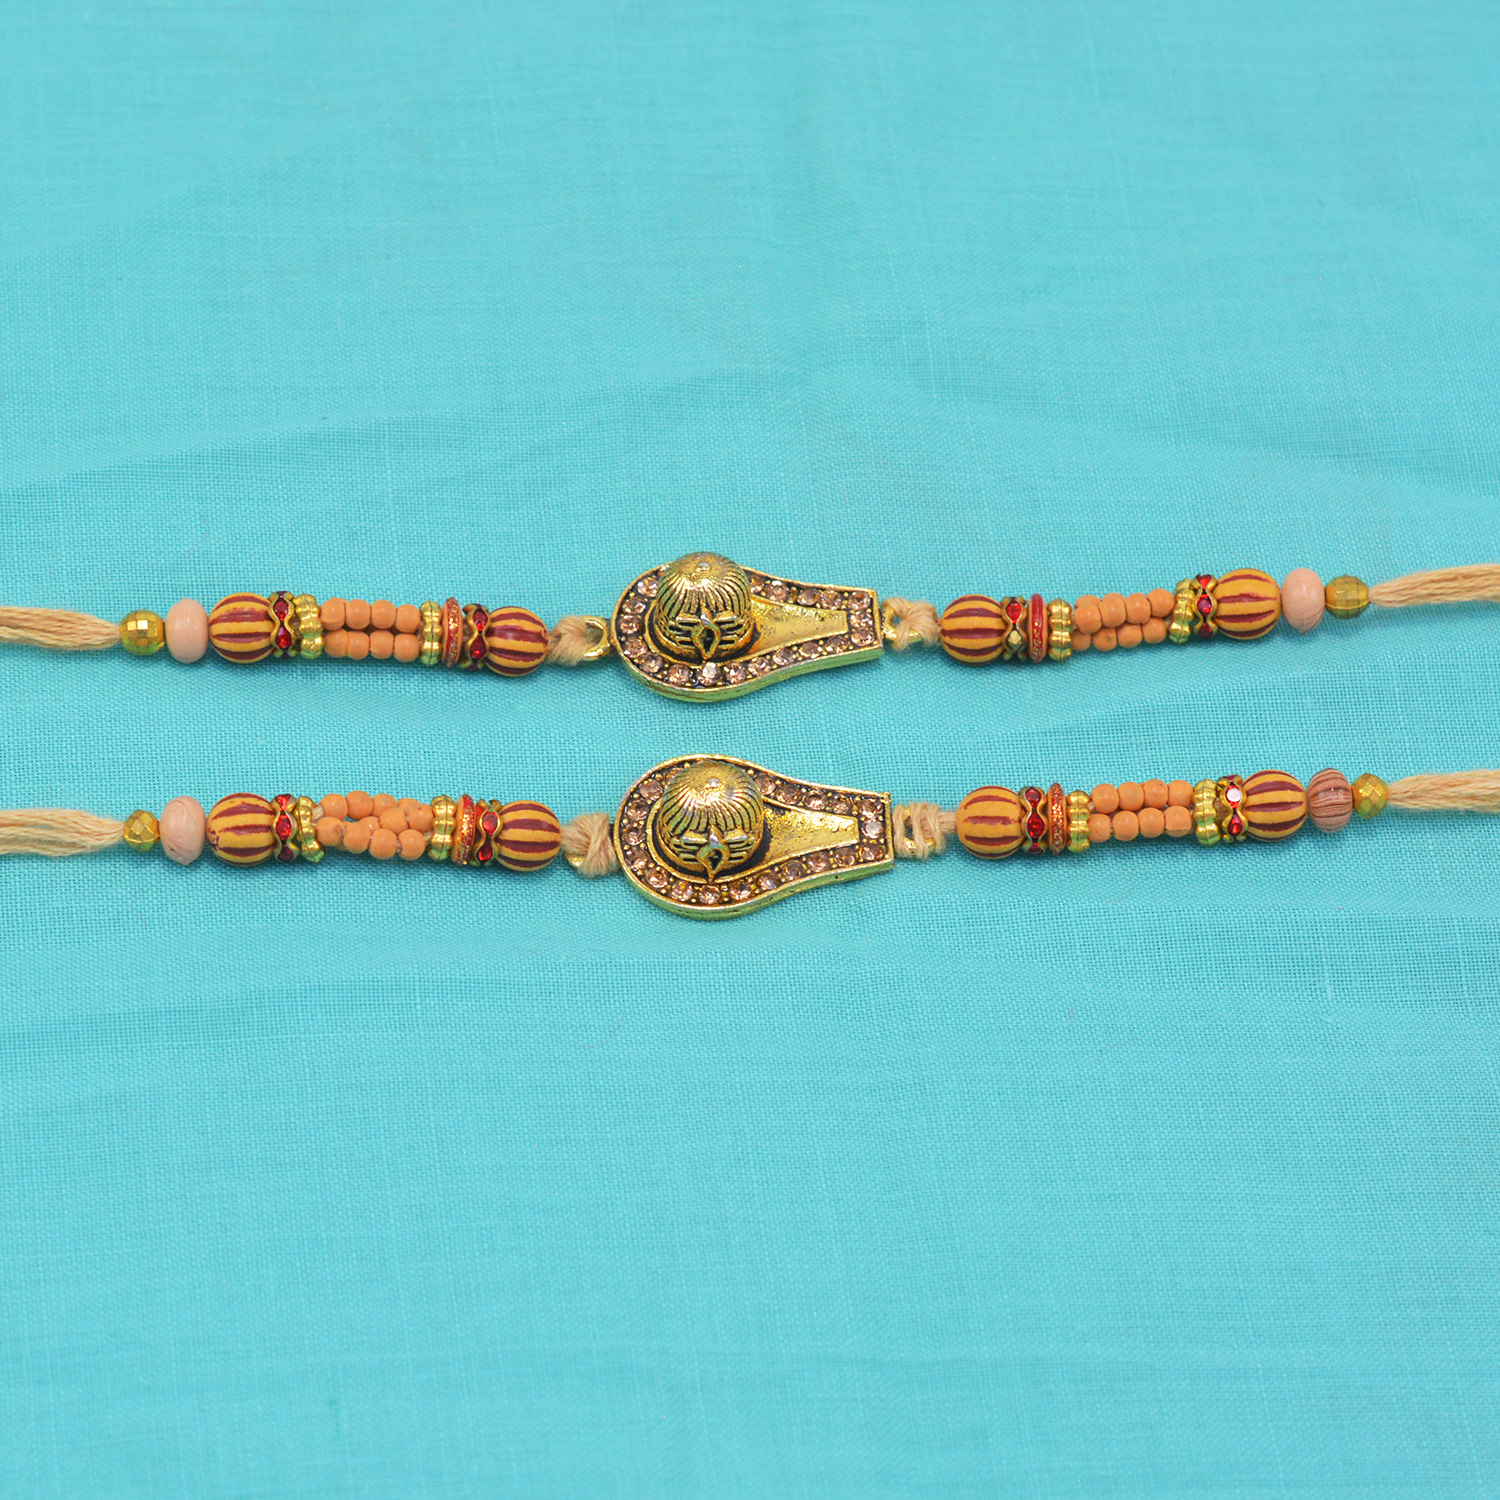 Auspicious Shivling and Sandalwood Beads Awesome Looking Set of 2 Brother Rakhis